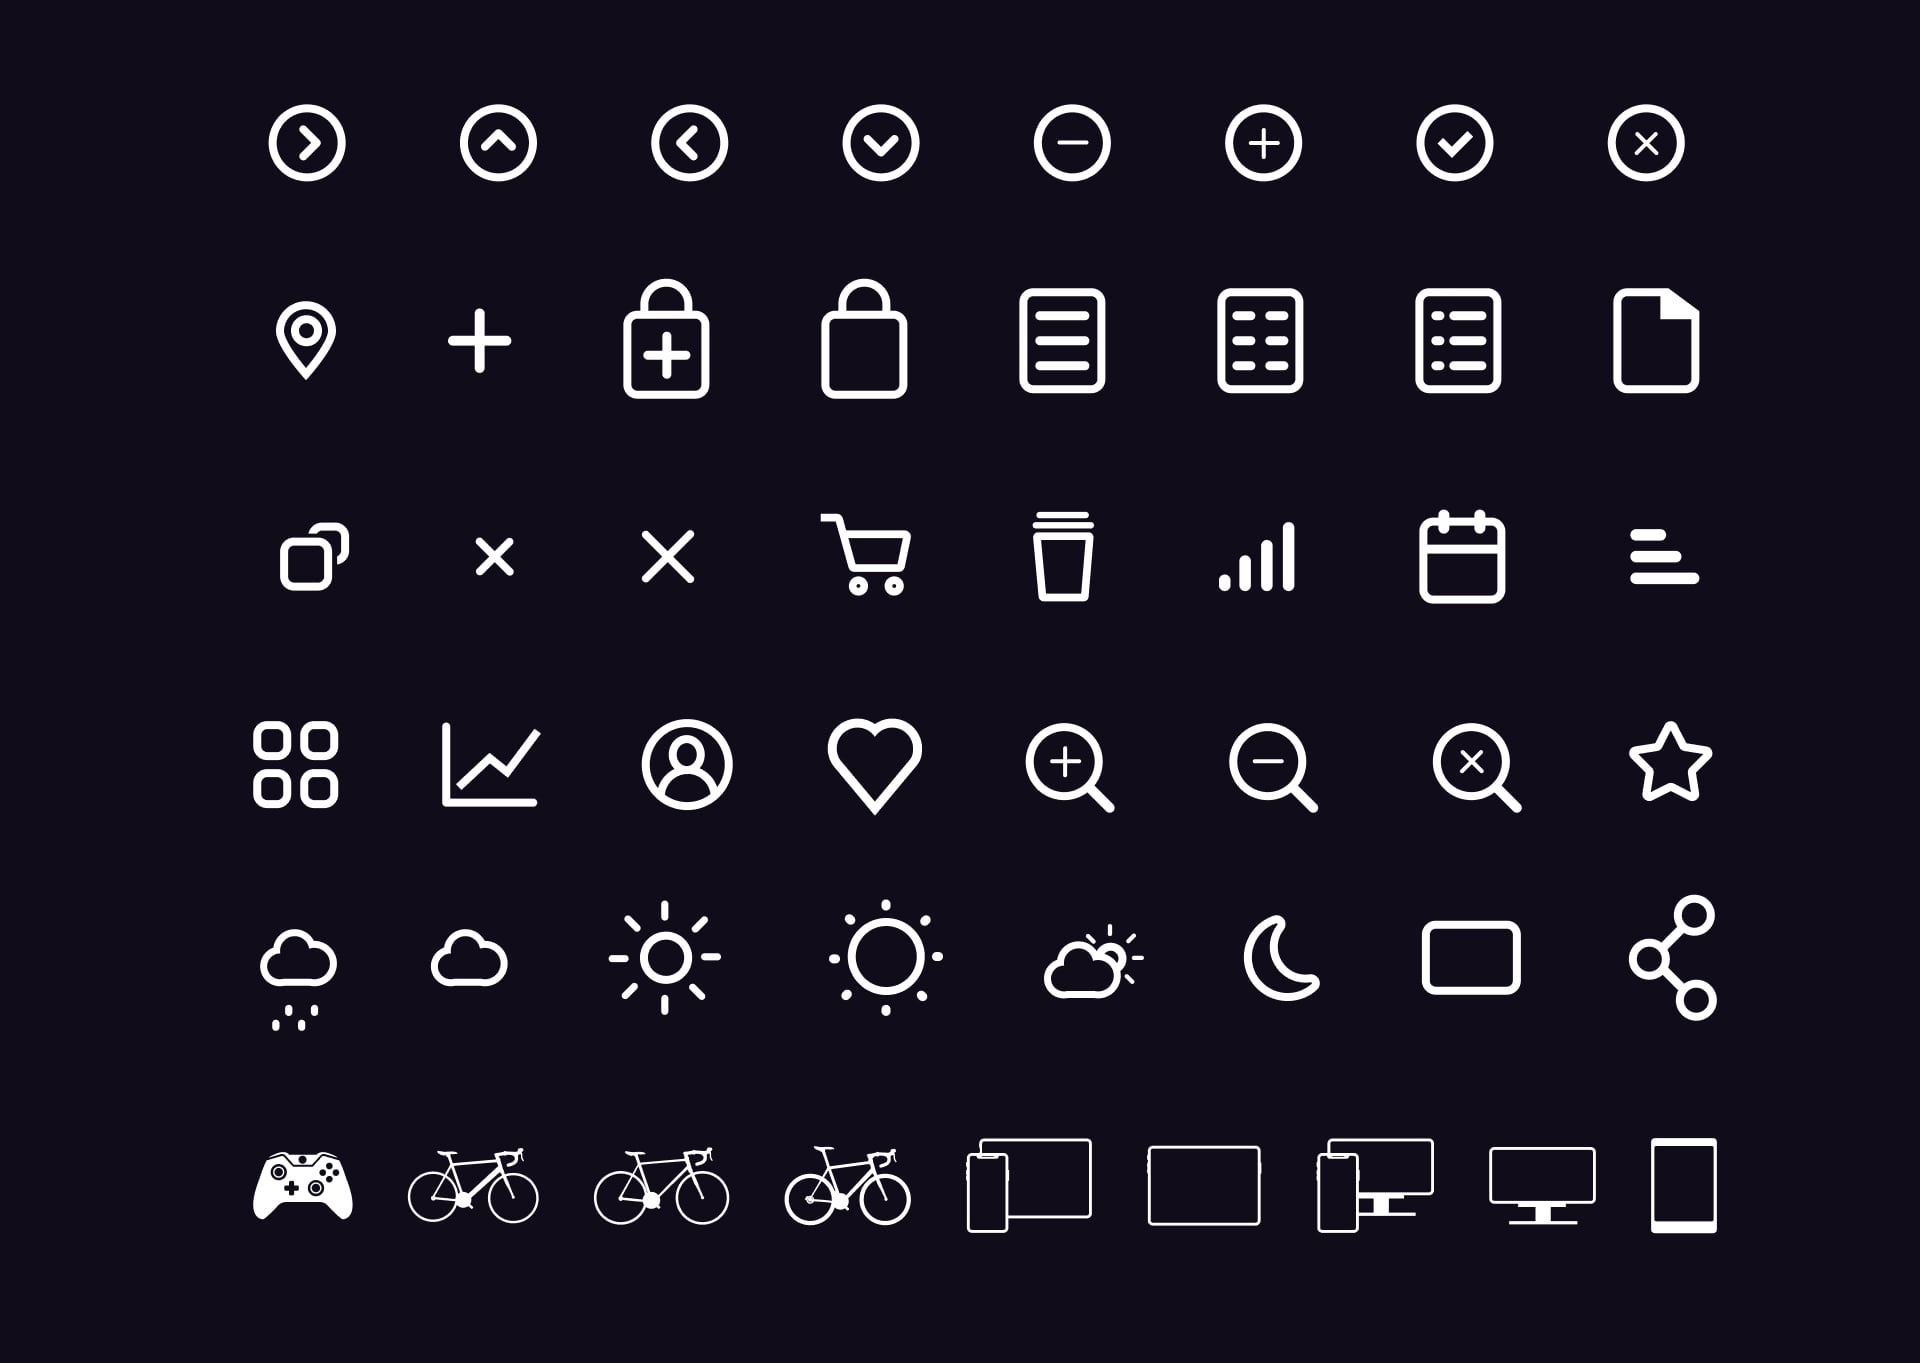 Small icons designed by Christopher Nathaniel